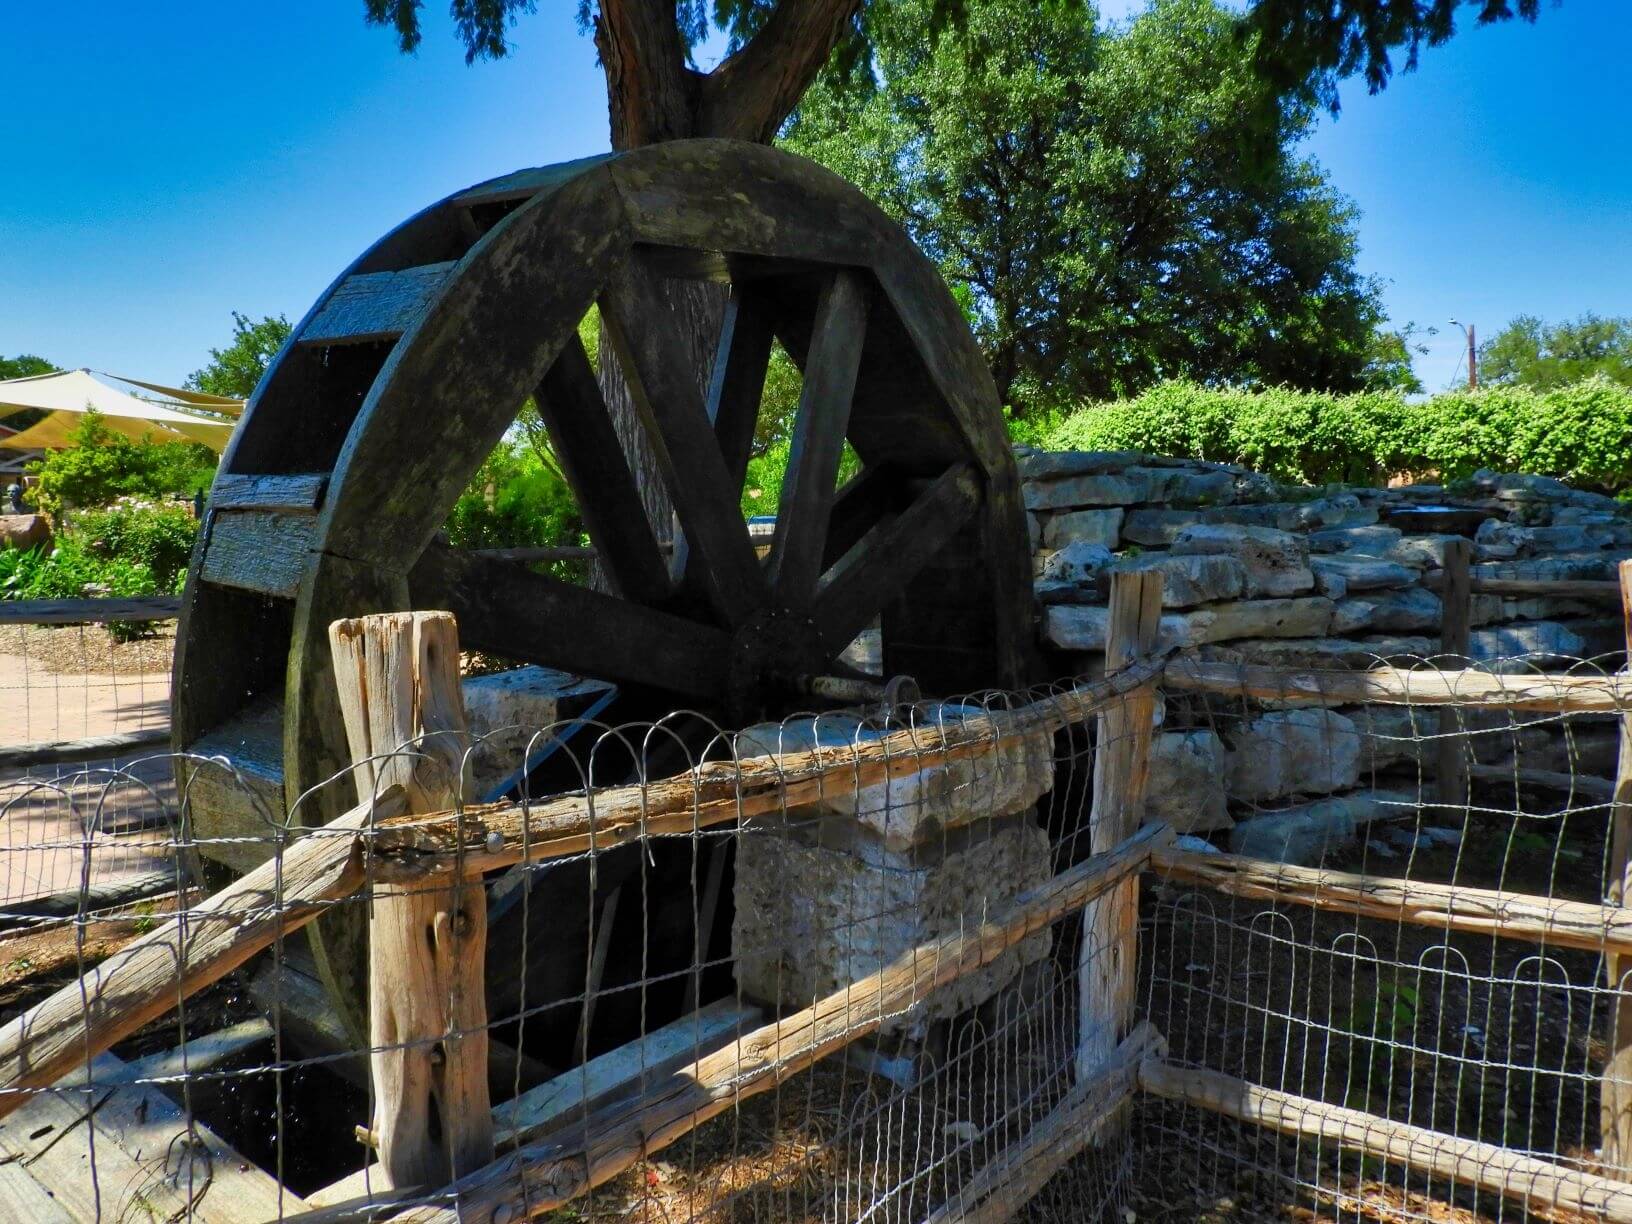 a wooden water wheel surrounded by fencing